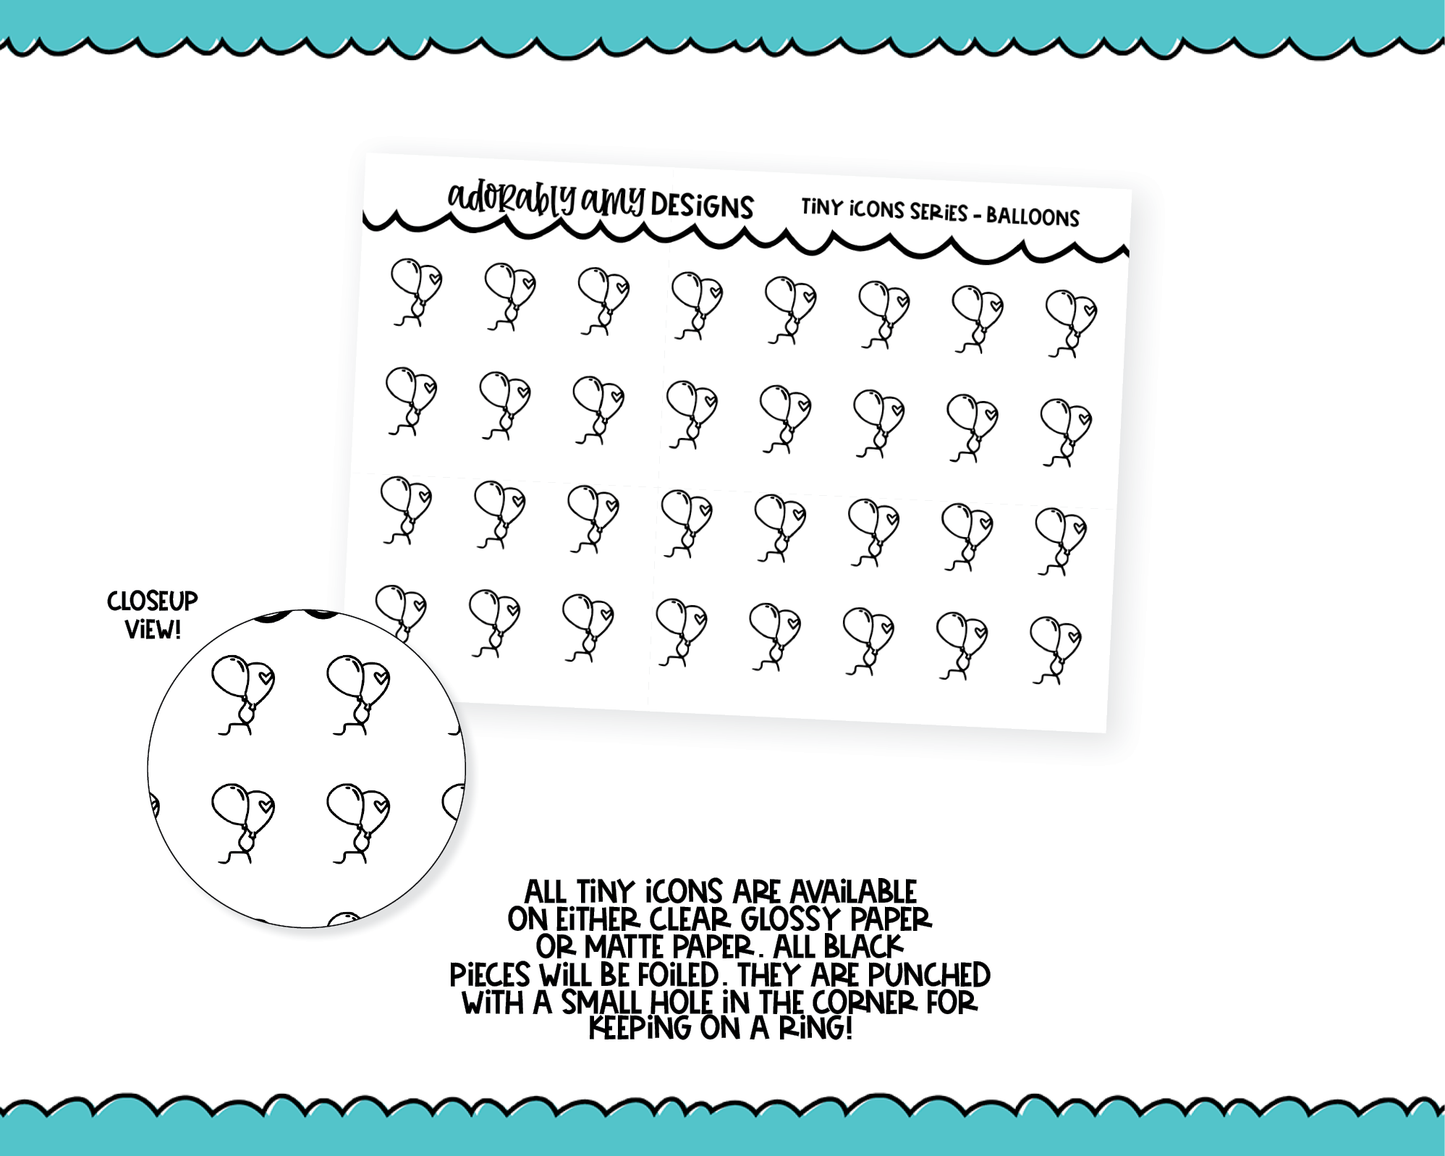 Foiled Tiny Icon Series - Balloons Tiny Size Planner Stickers for any Planner or Insert